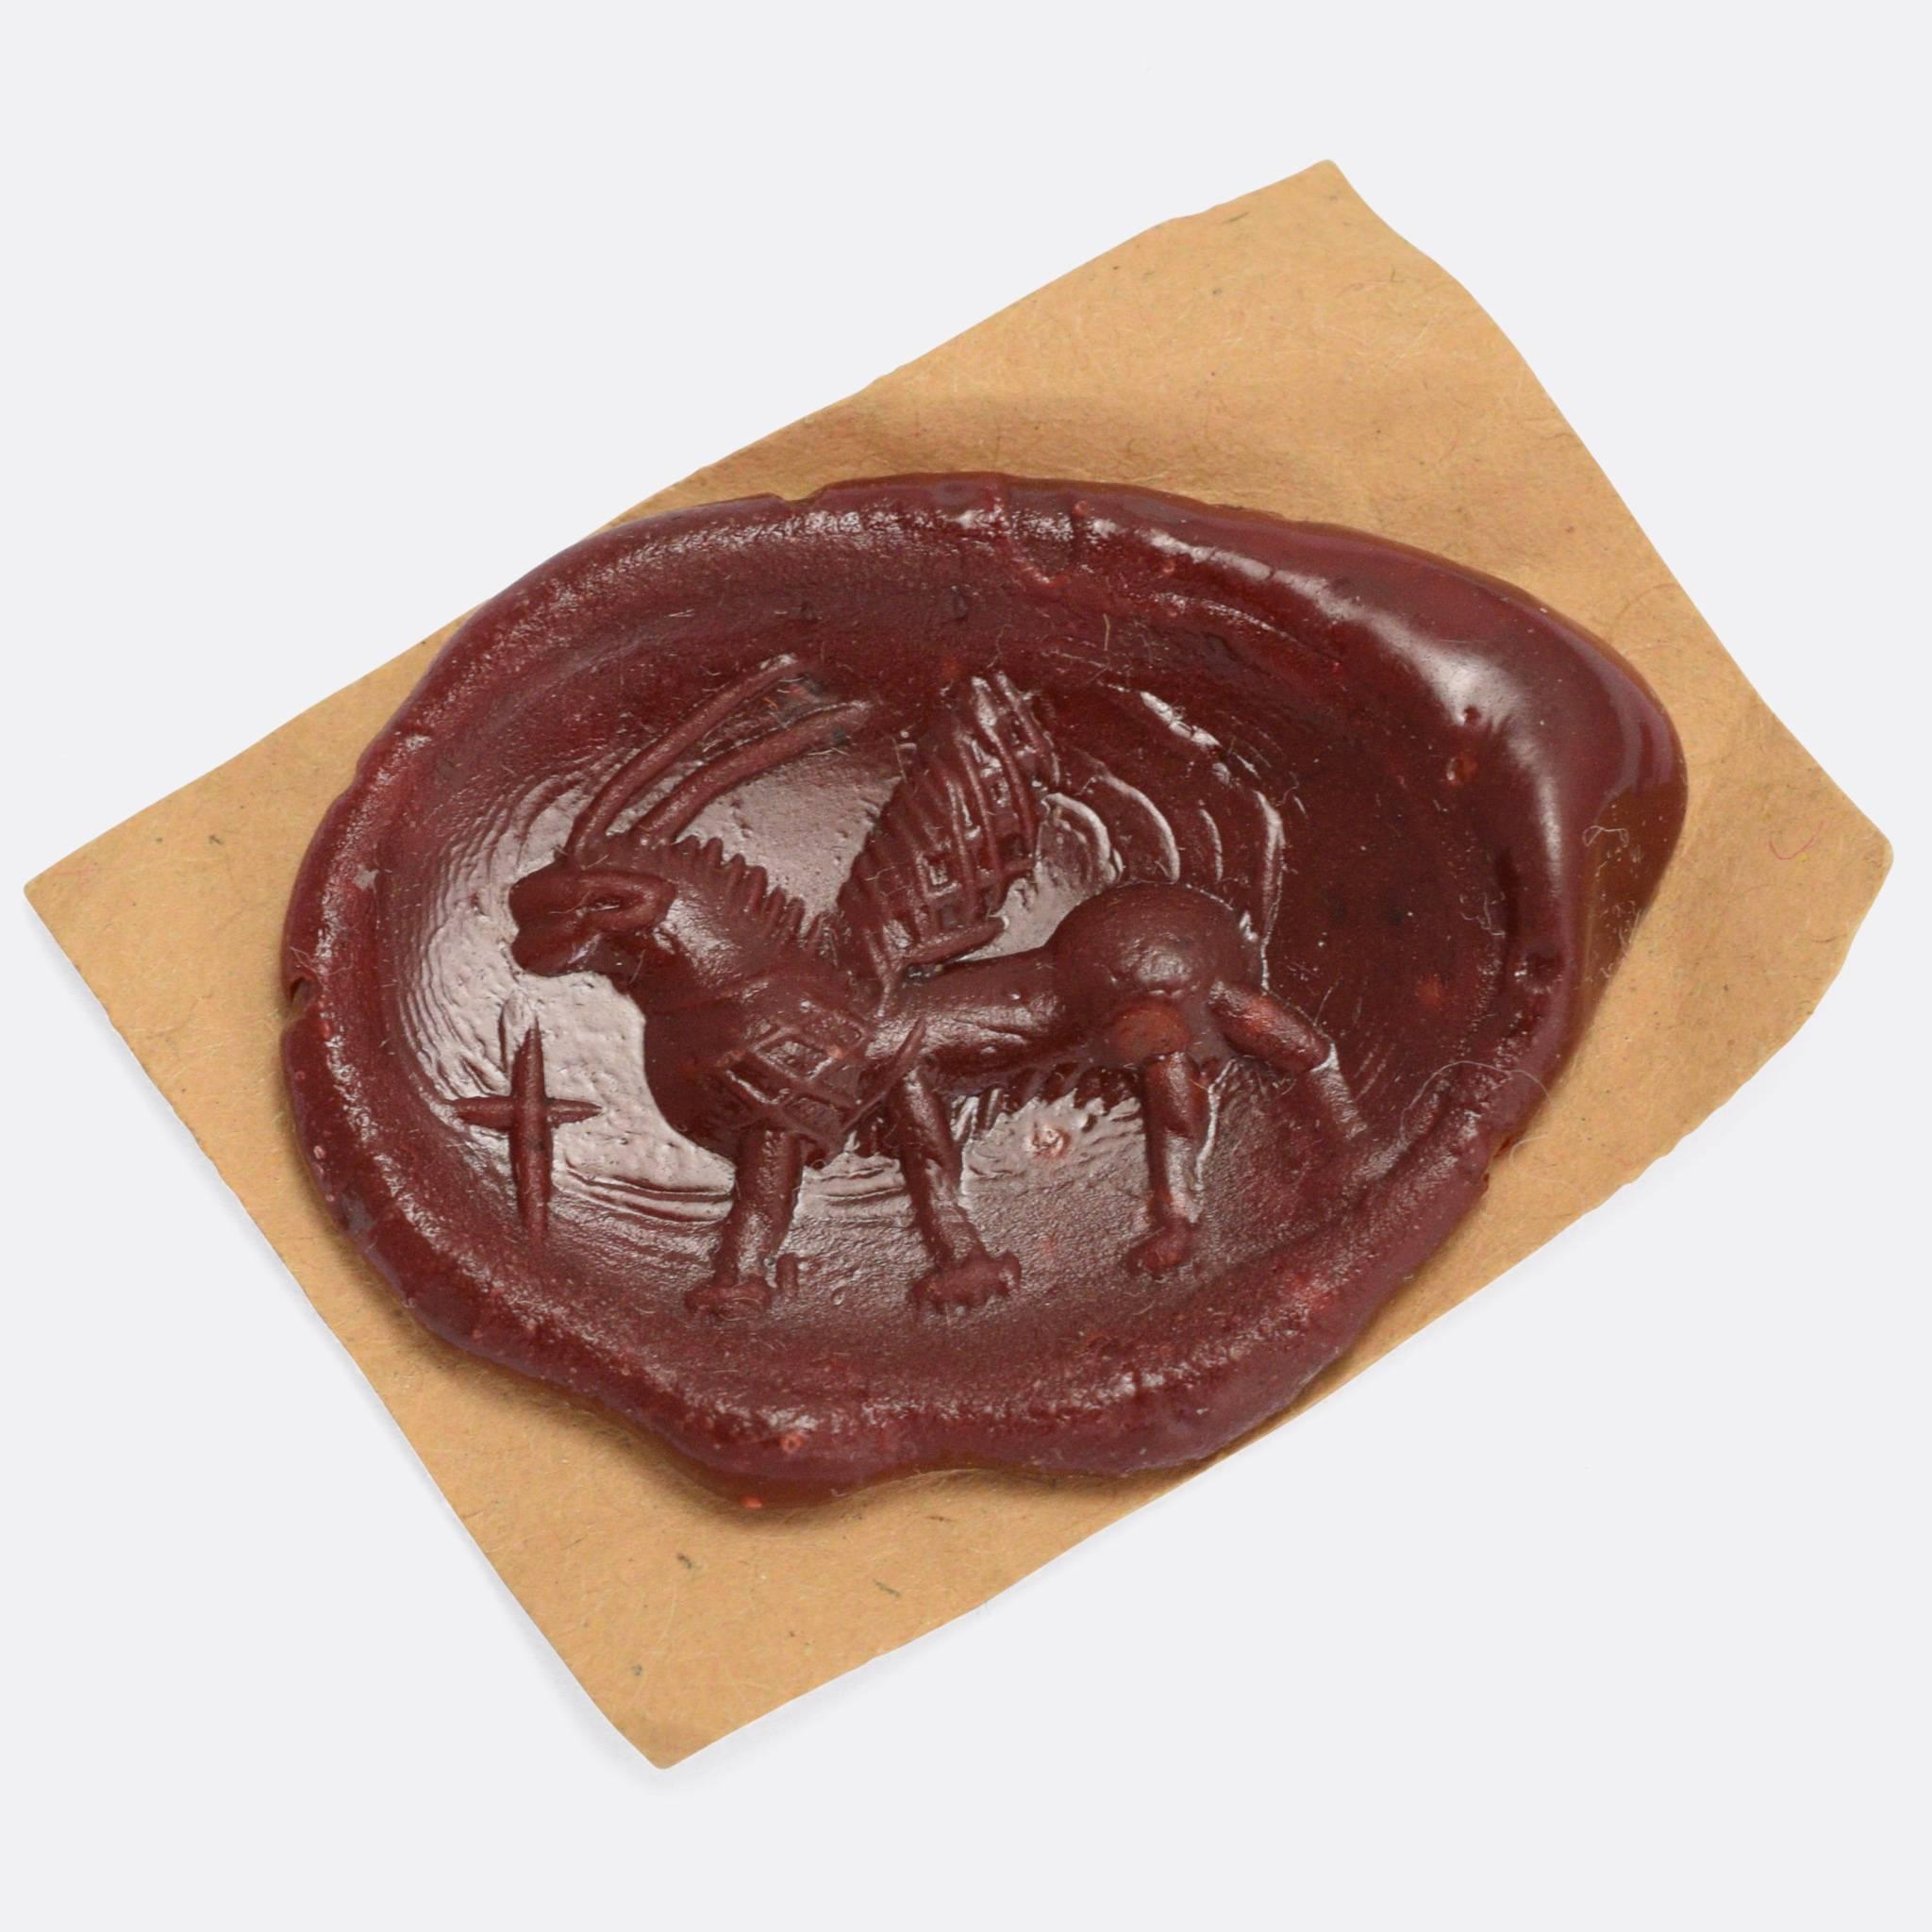 An incredible antique intaglio pendant depicting a Sasanian winged horse. The agate panel dates from around the 5th Century AD, with excellent detailing, and it remains in remarkably good condition. It has been set in a Georgian 18k gold mount, with